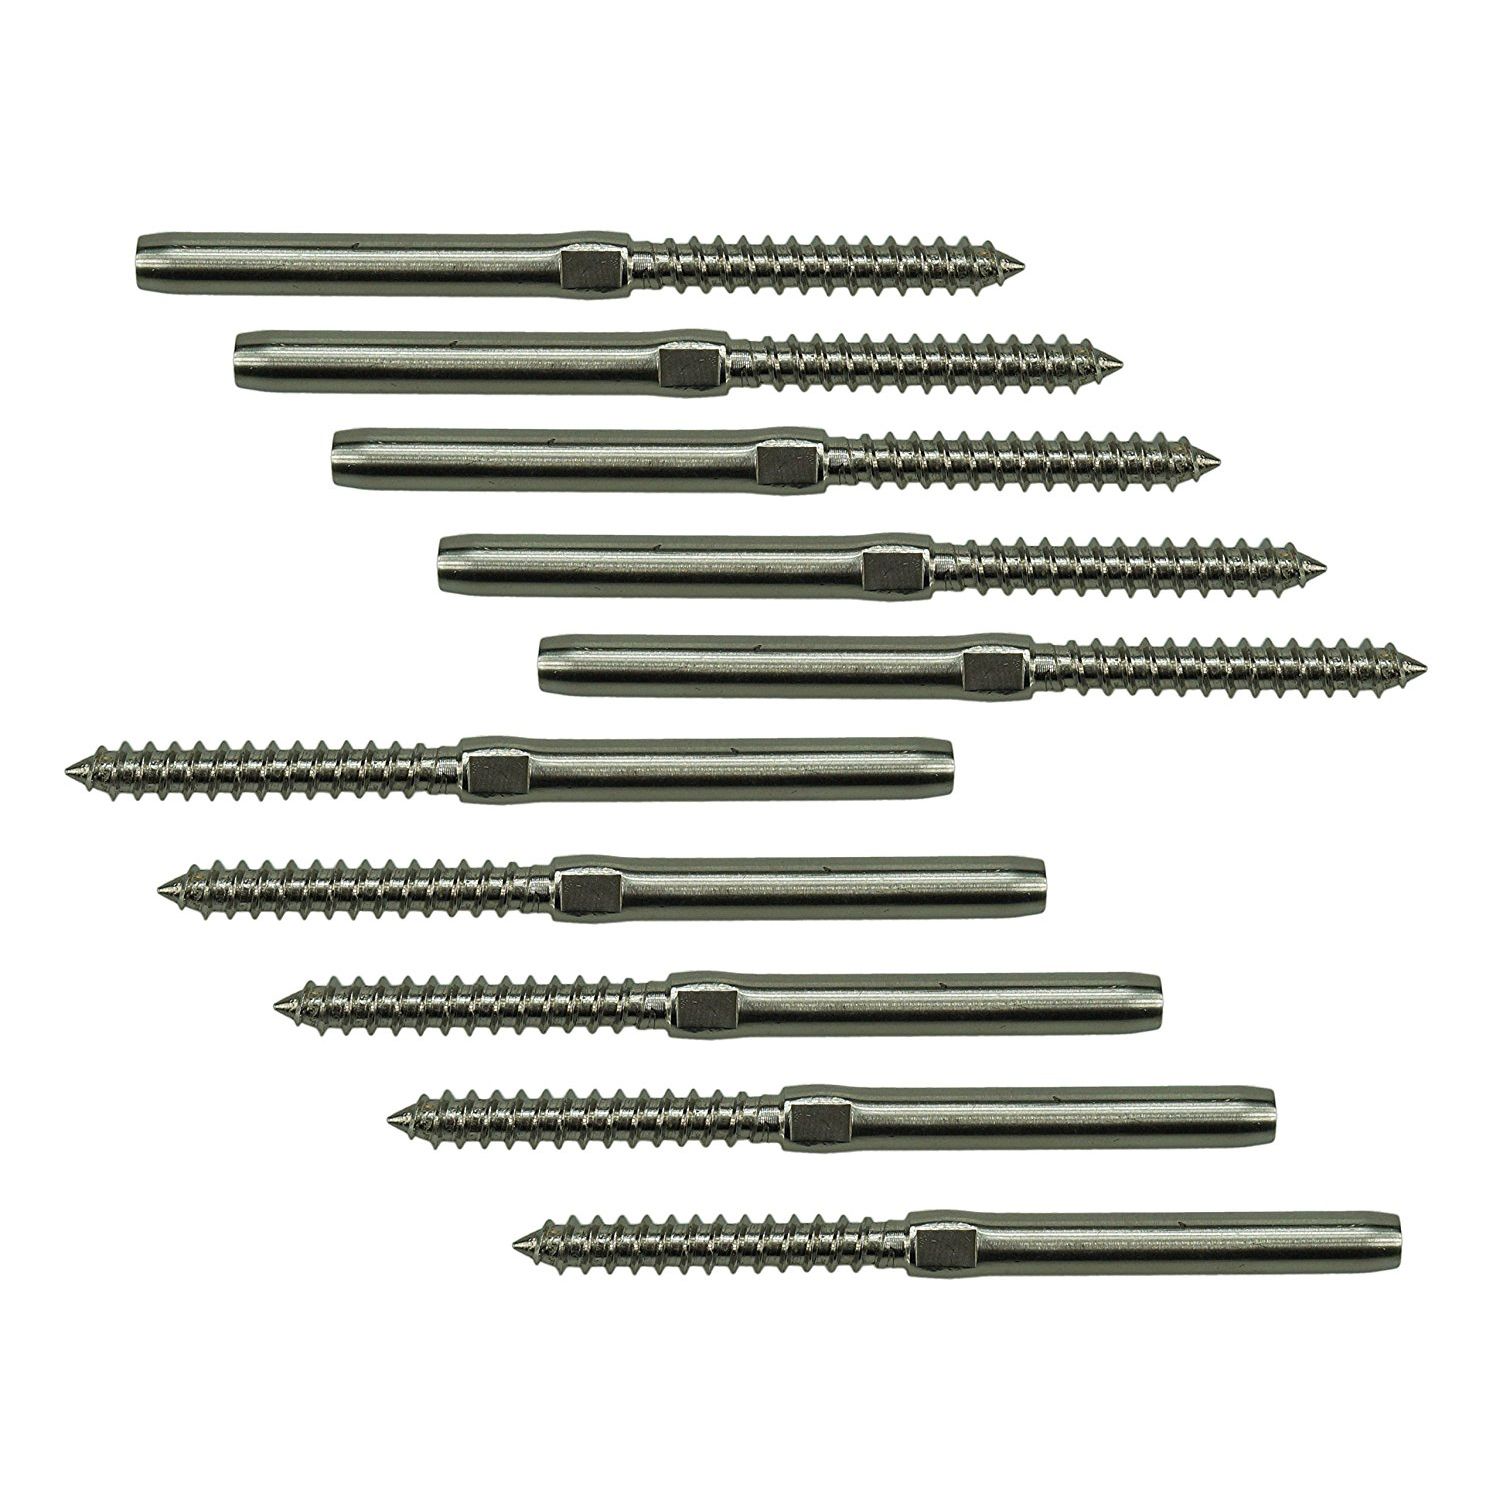 10Pcs-Lag-Screw-Hand-Crimp-Swage-Stud-for-Cable-Railing-Stainless-Steel-316-Marine-Grade-Tensioner-1322601